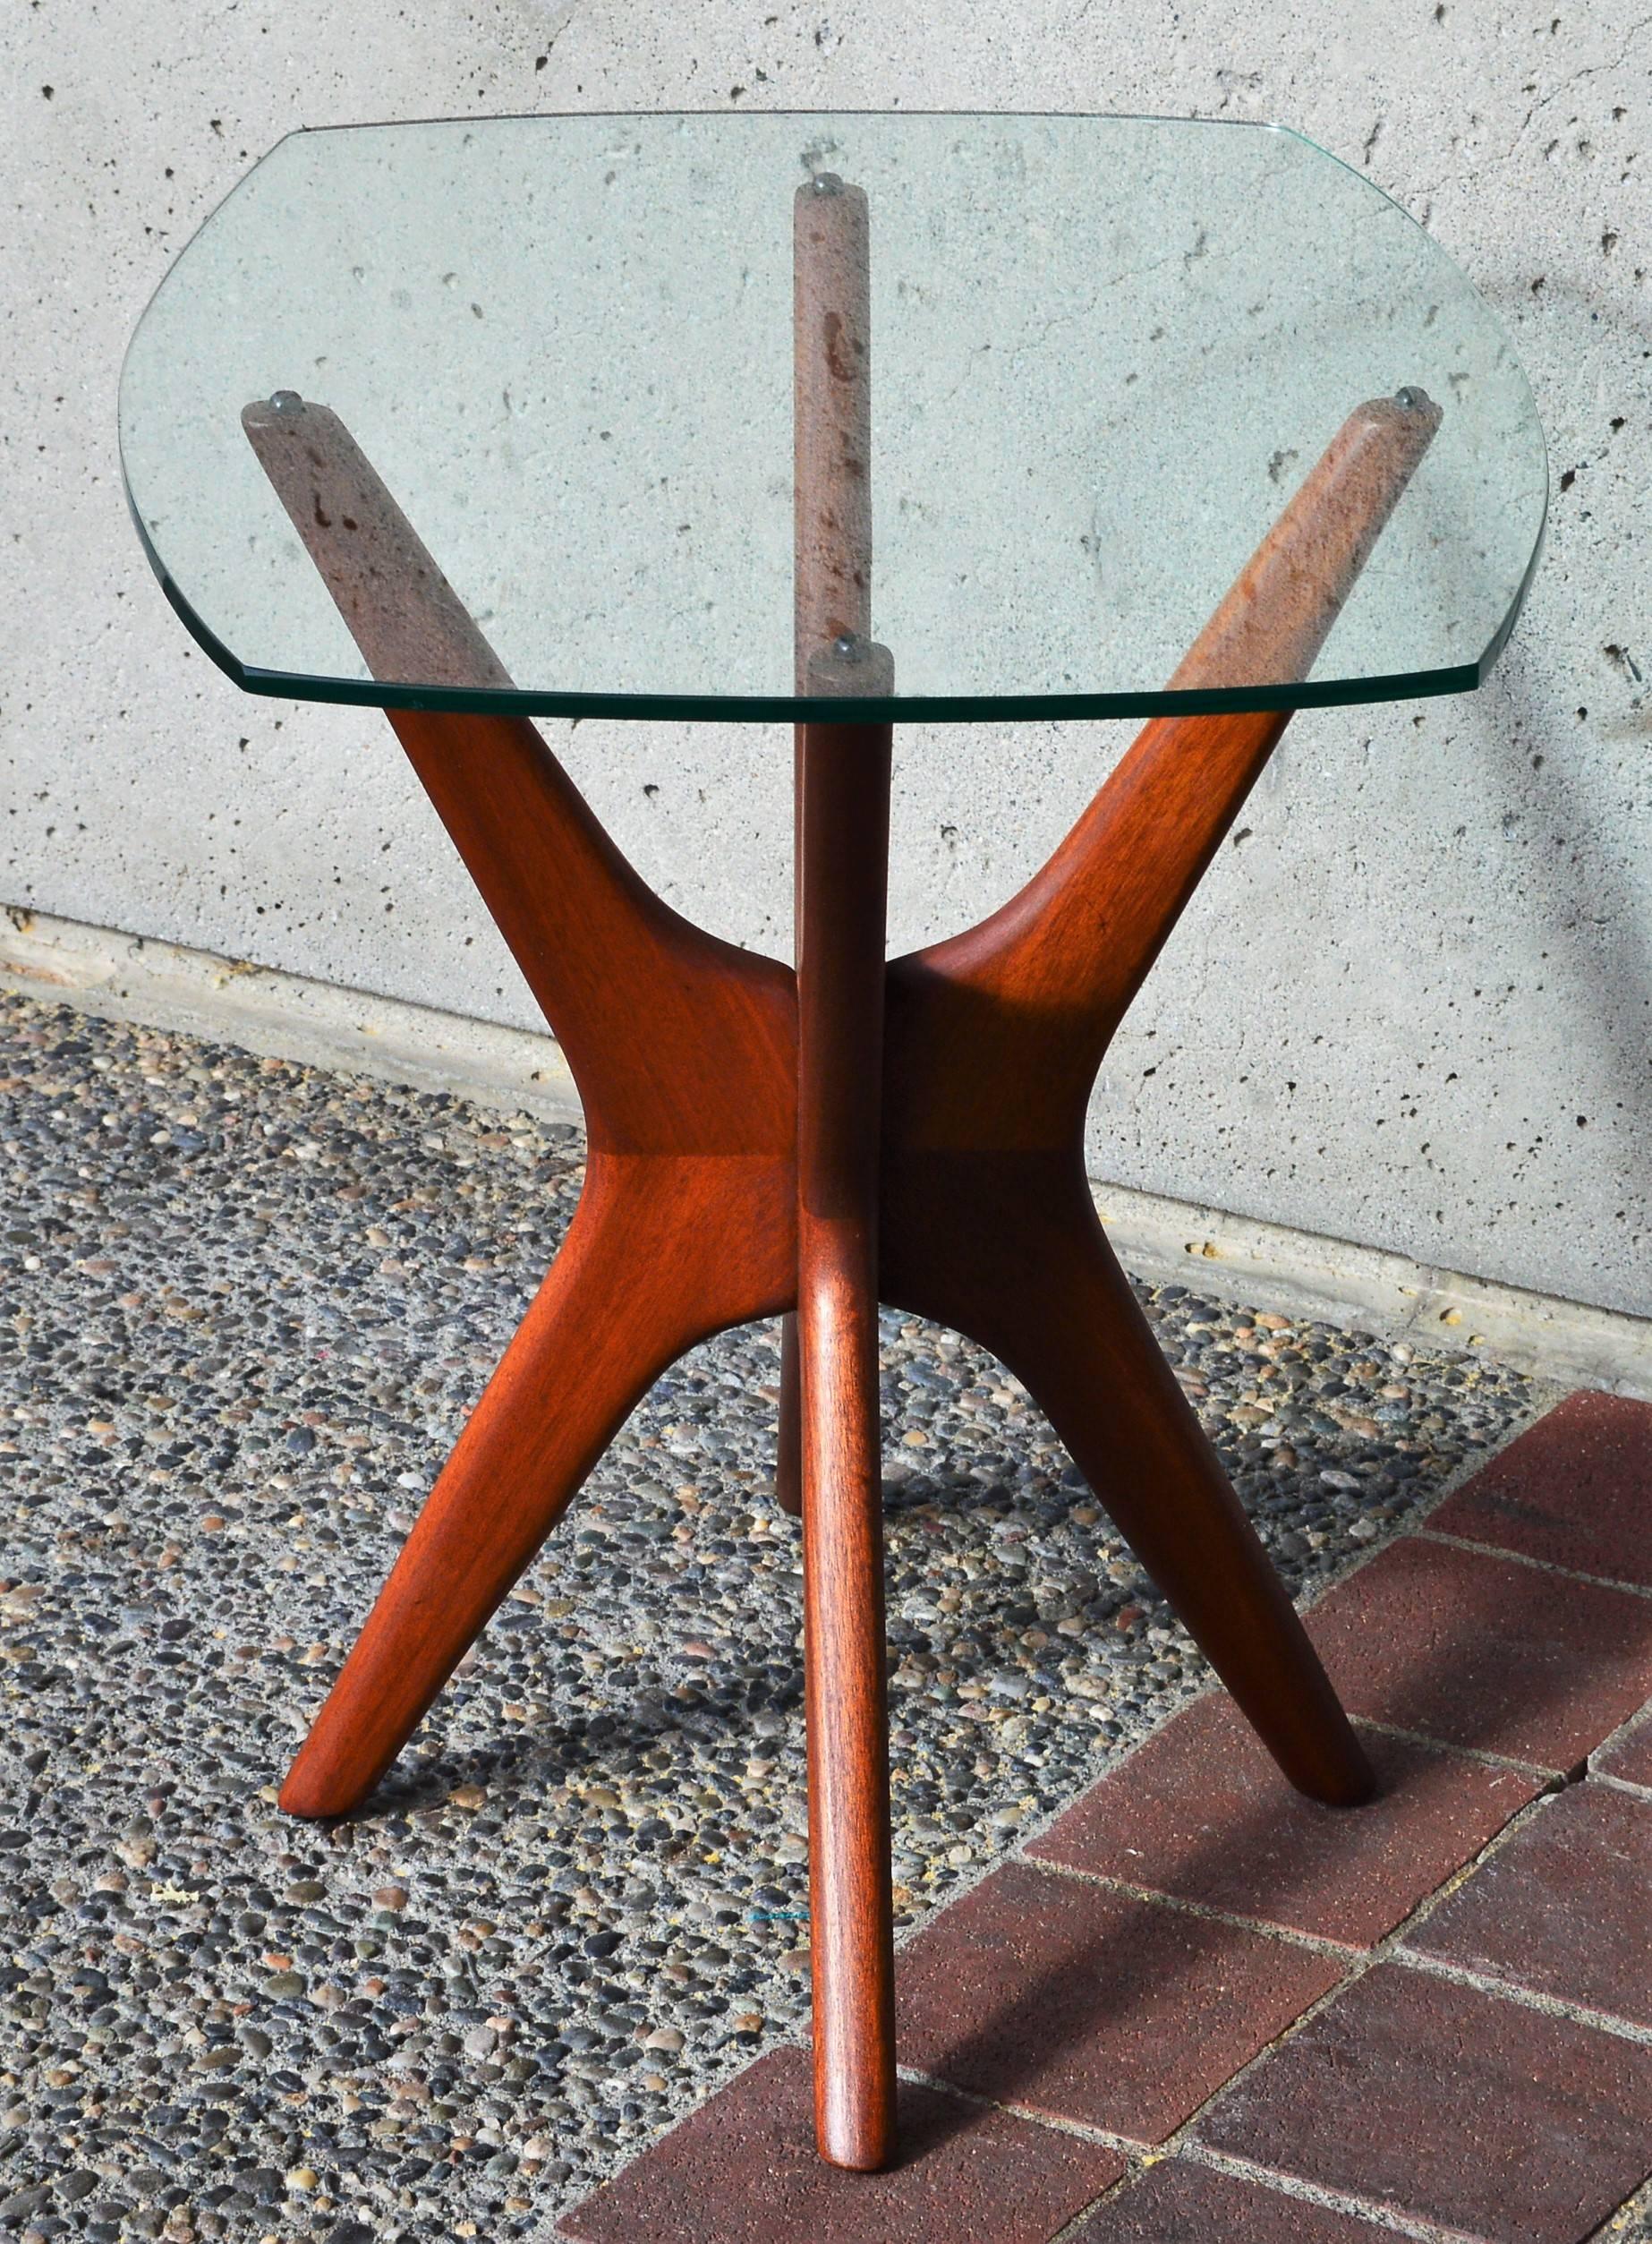 This fabulous iconic Mid-Century Modern solid walnut base side table, reminiscent of childhood Jacks, has an organic shaped curved glass top and the most dramatic lines. Designed by Adrian Pearsall in the 1960s, the base has been completely restored